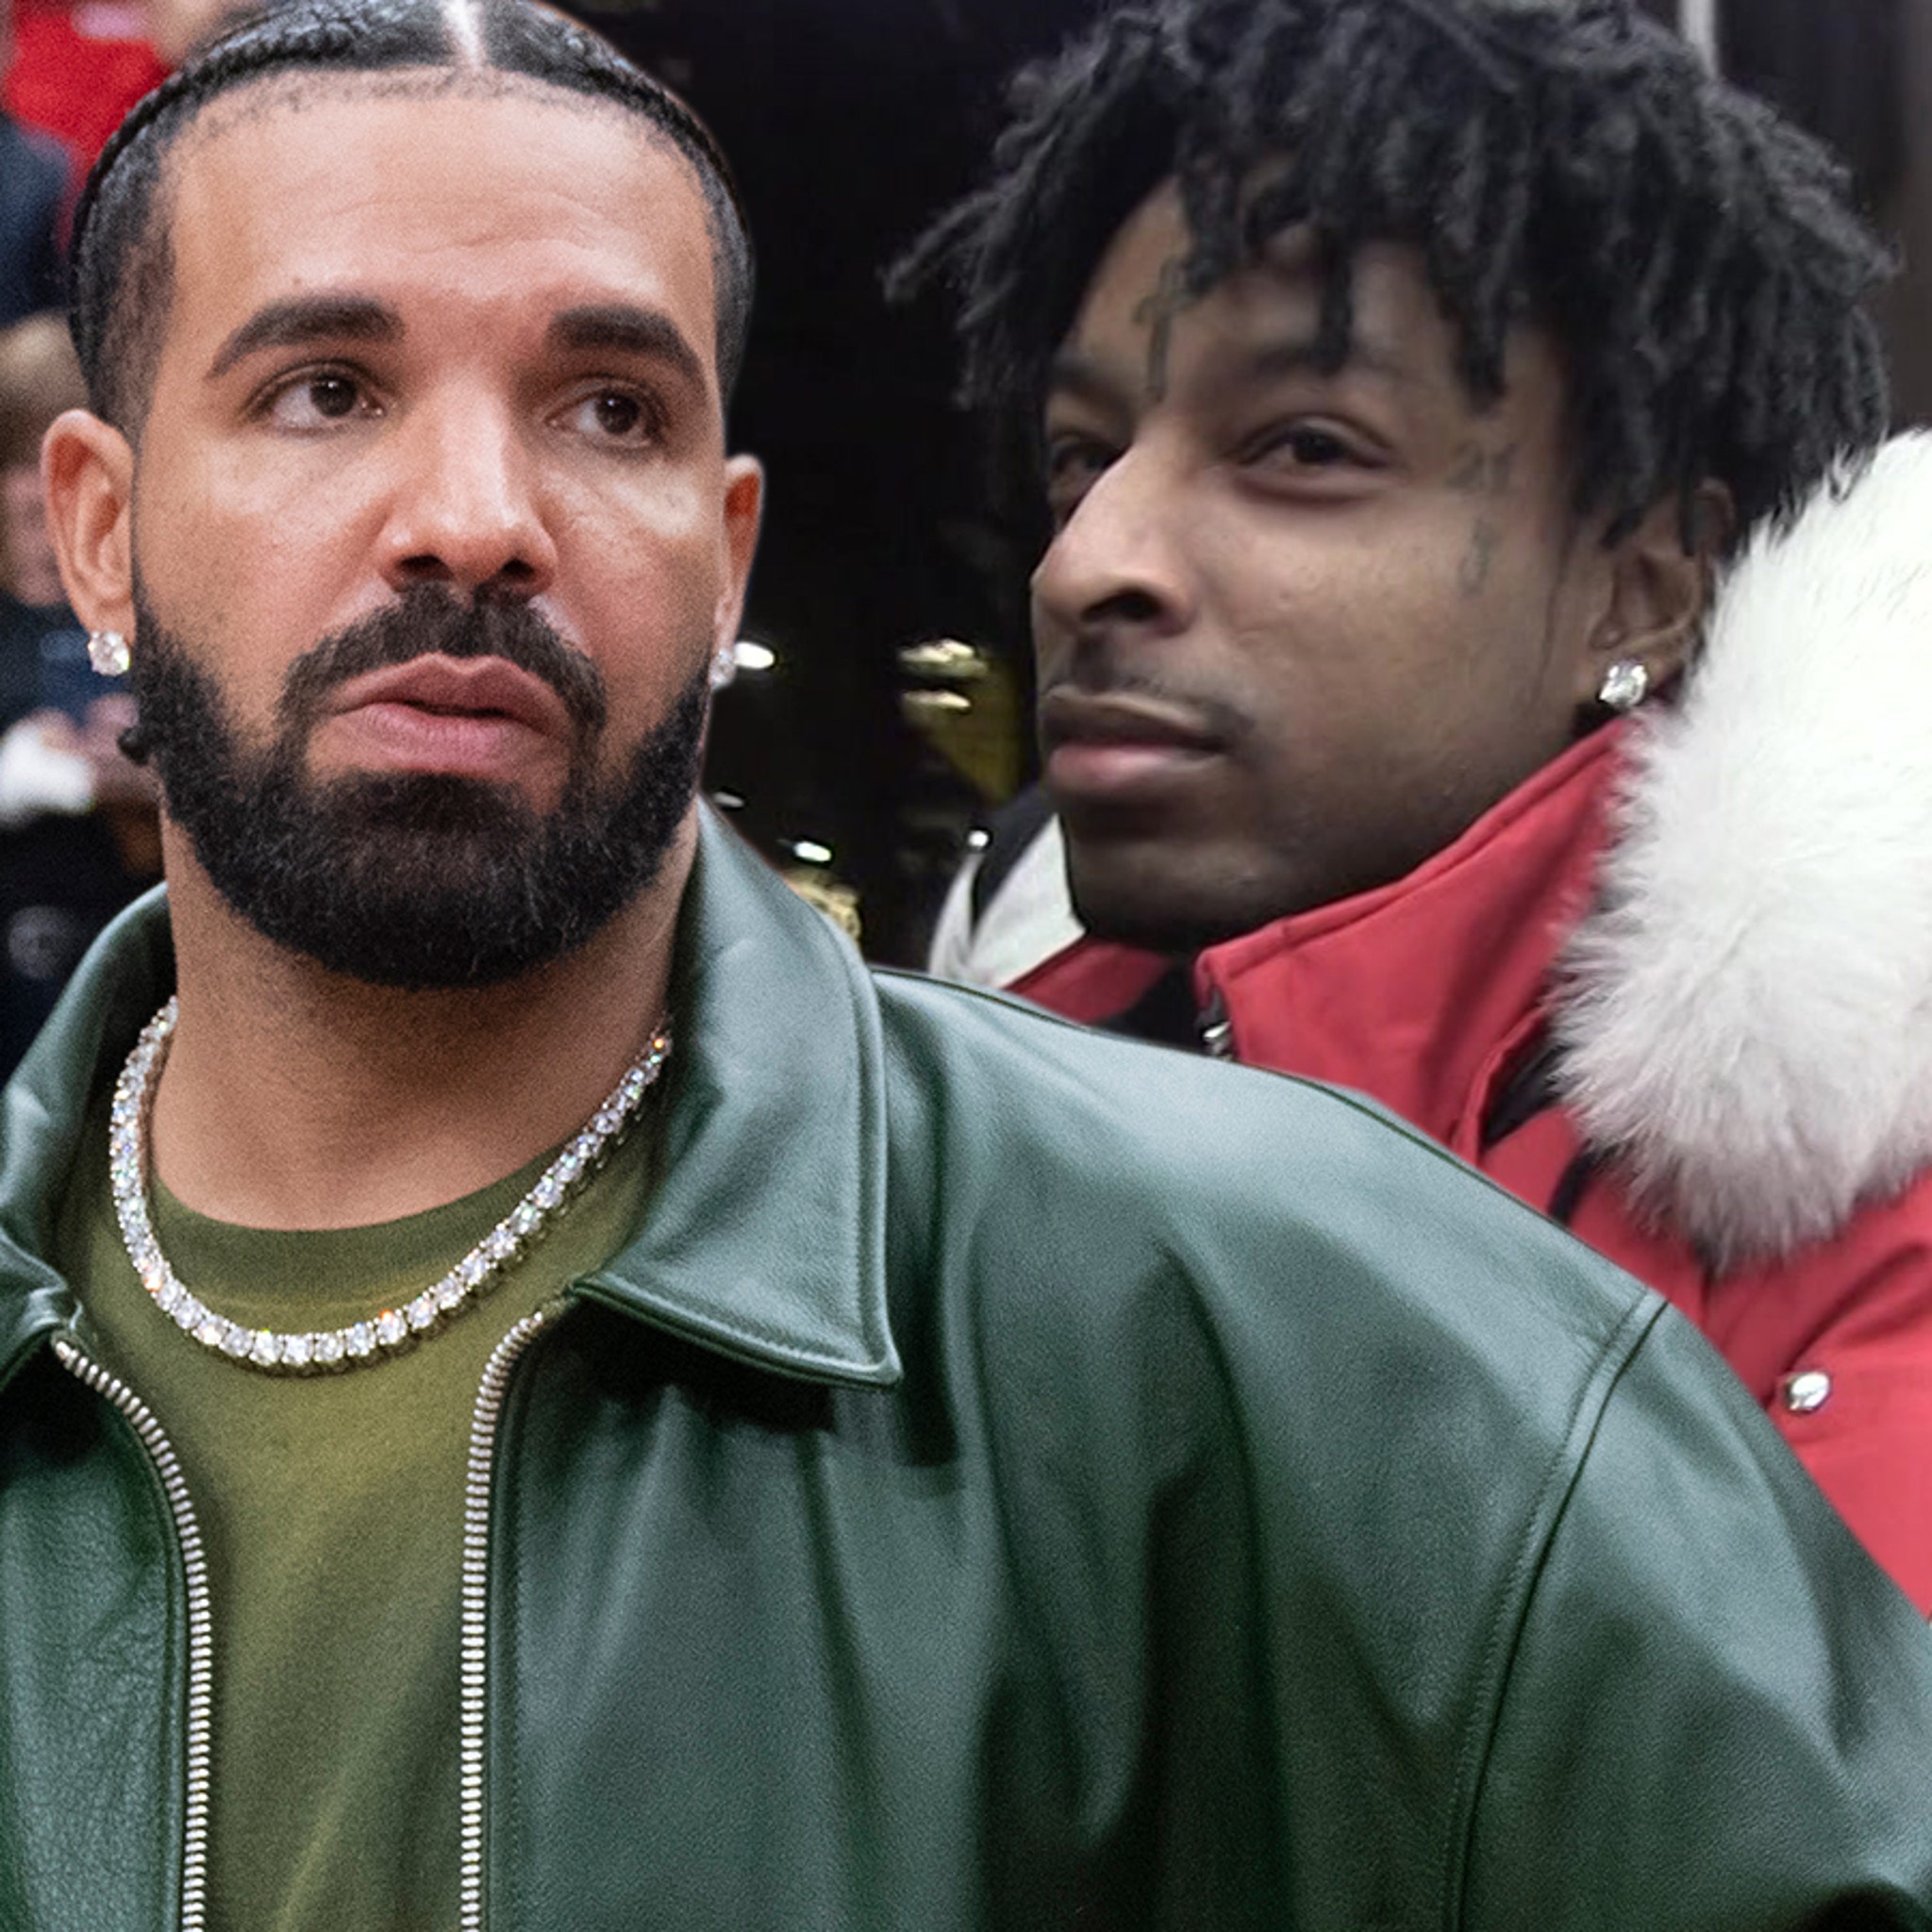 Drake, 21 Savage blocked from using 'Vogue' covers to promote